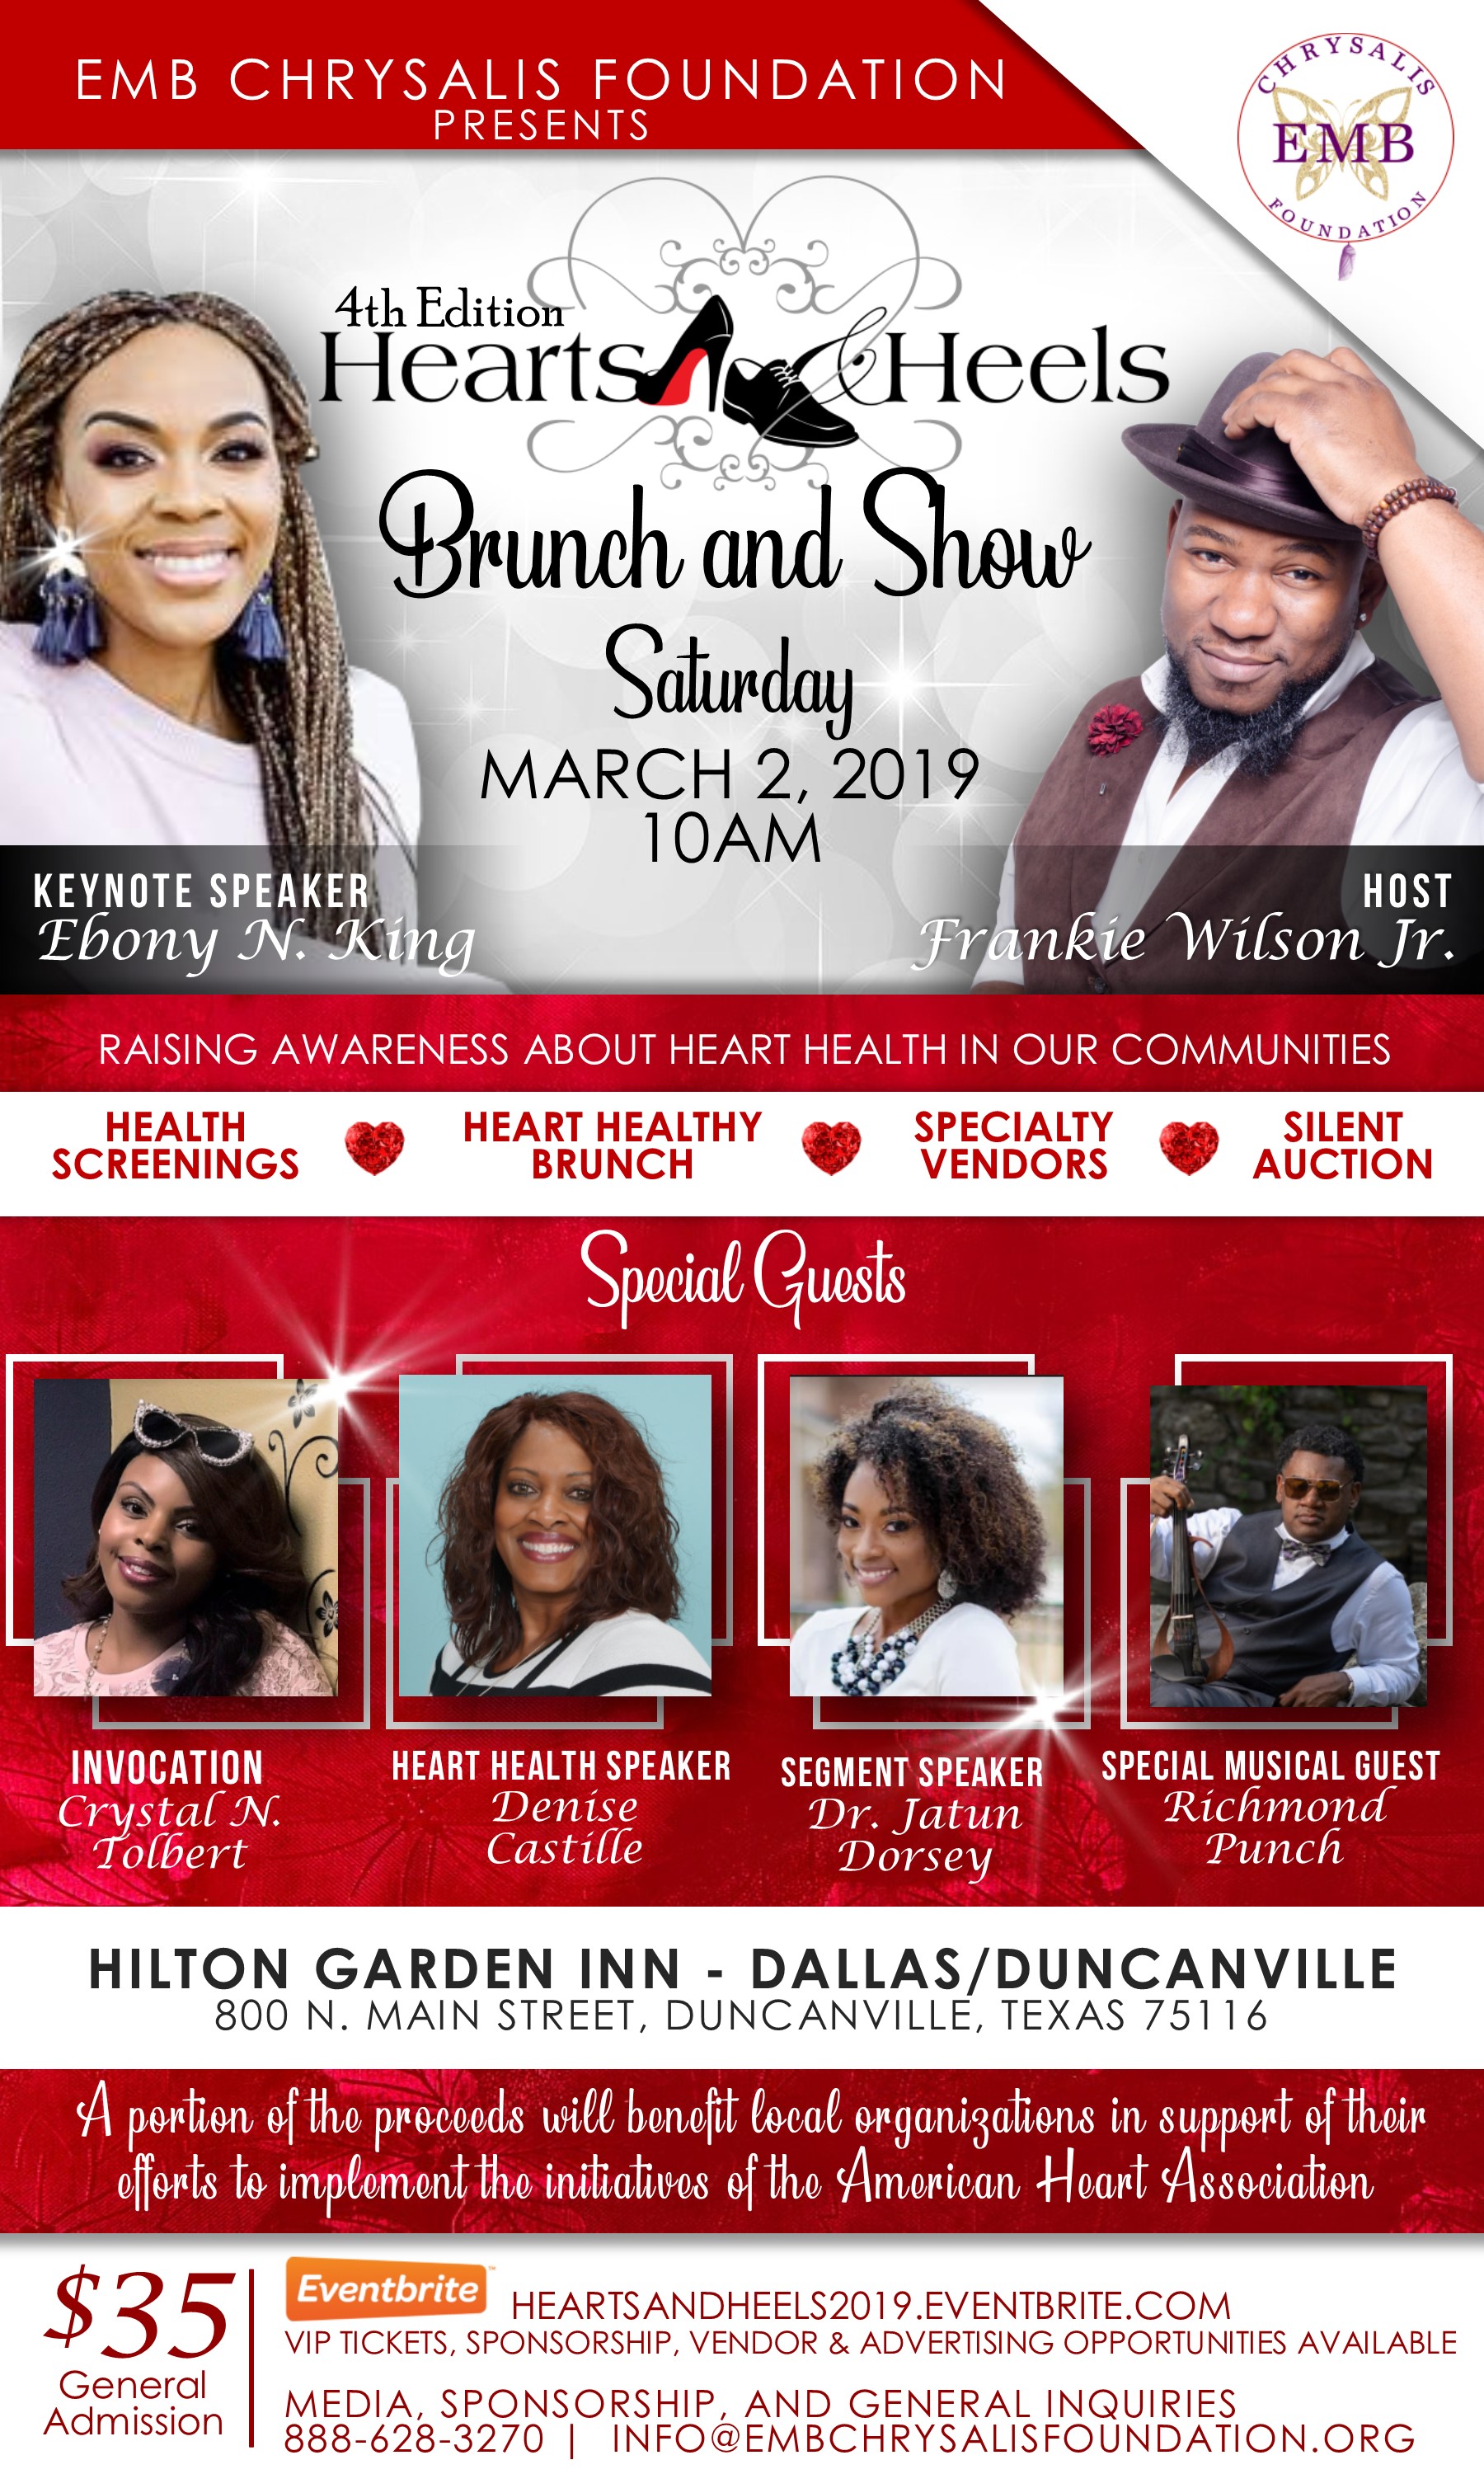 Hearts & Heels Brunch and Show to Take Place on March 2